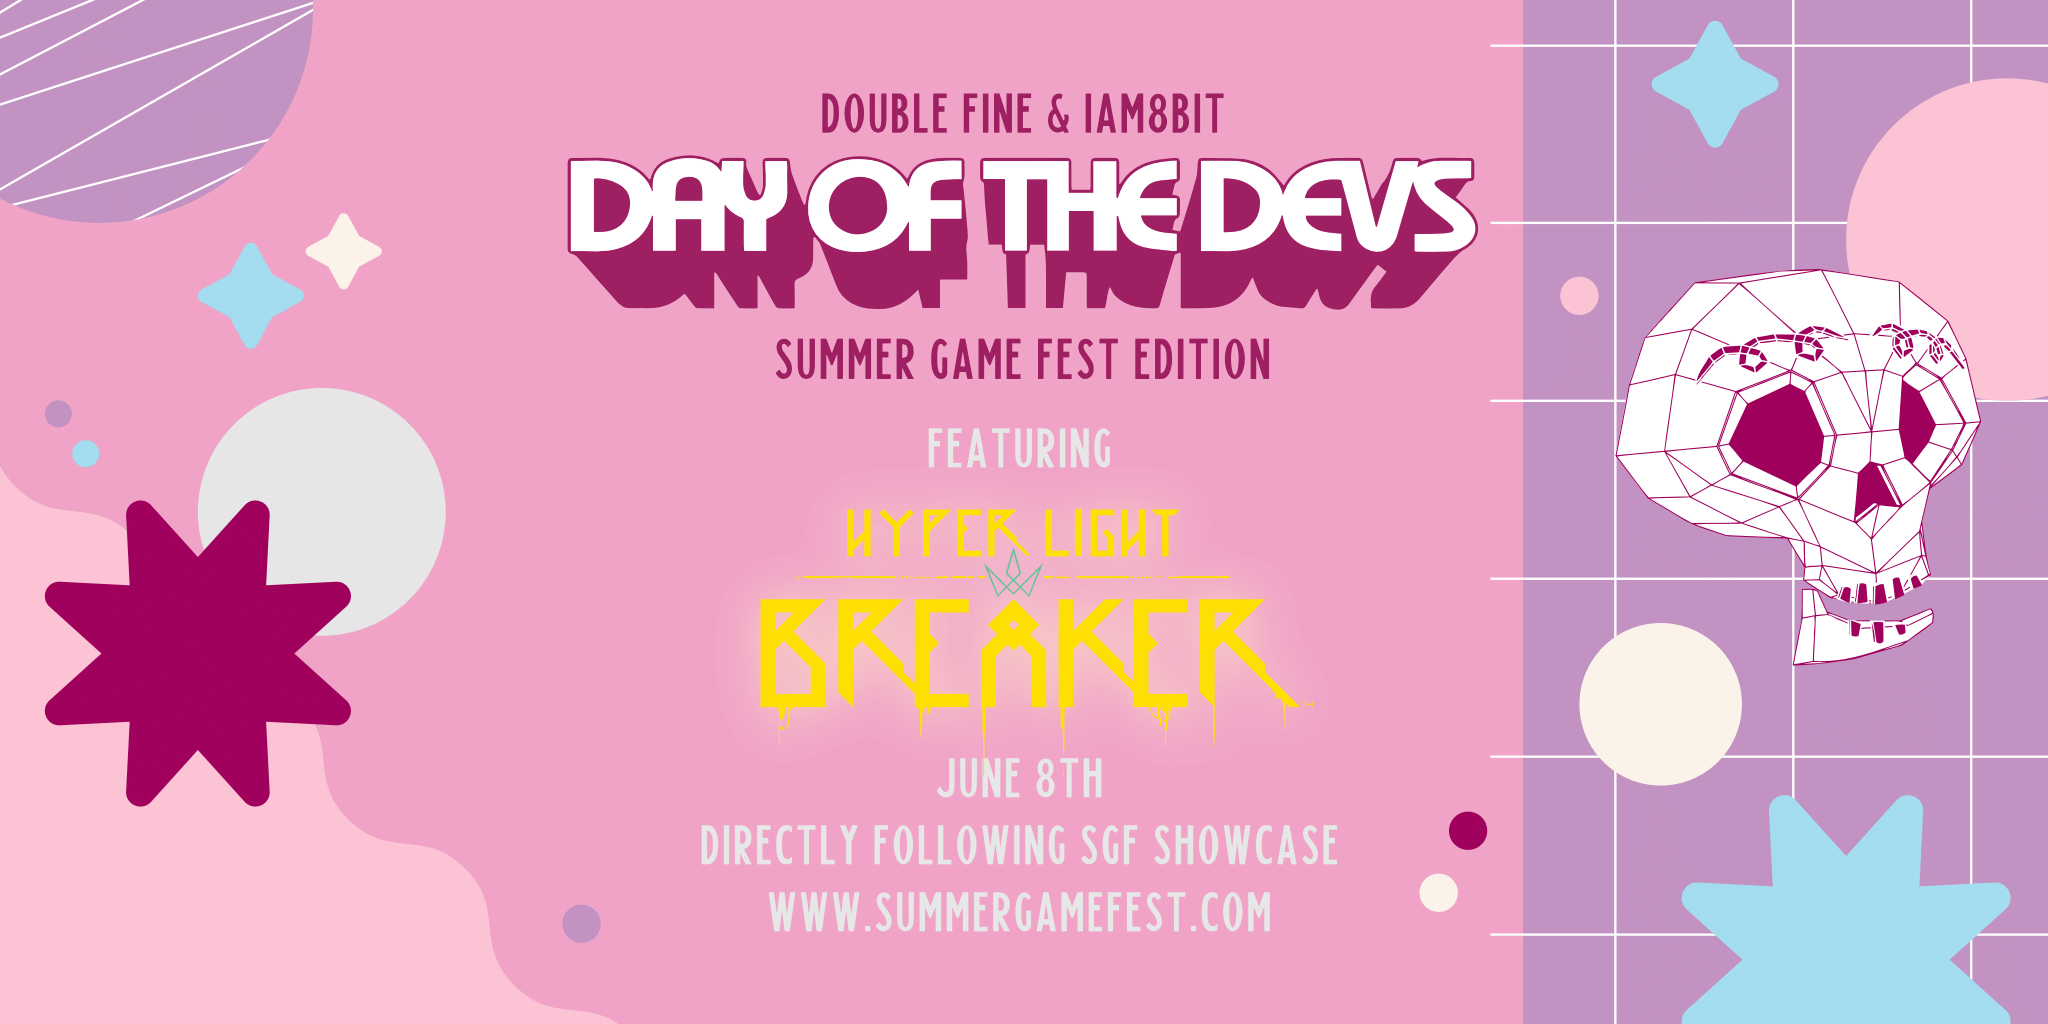 All The Summer Games Shows